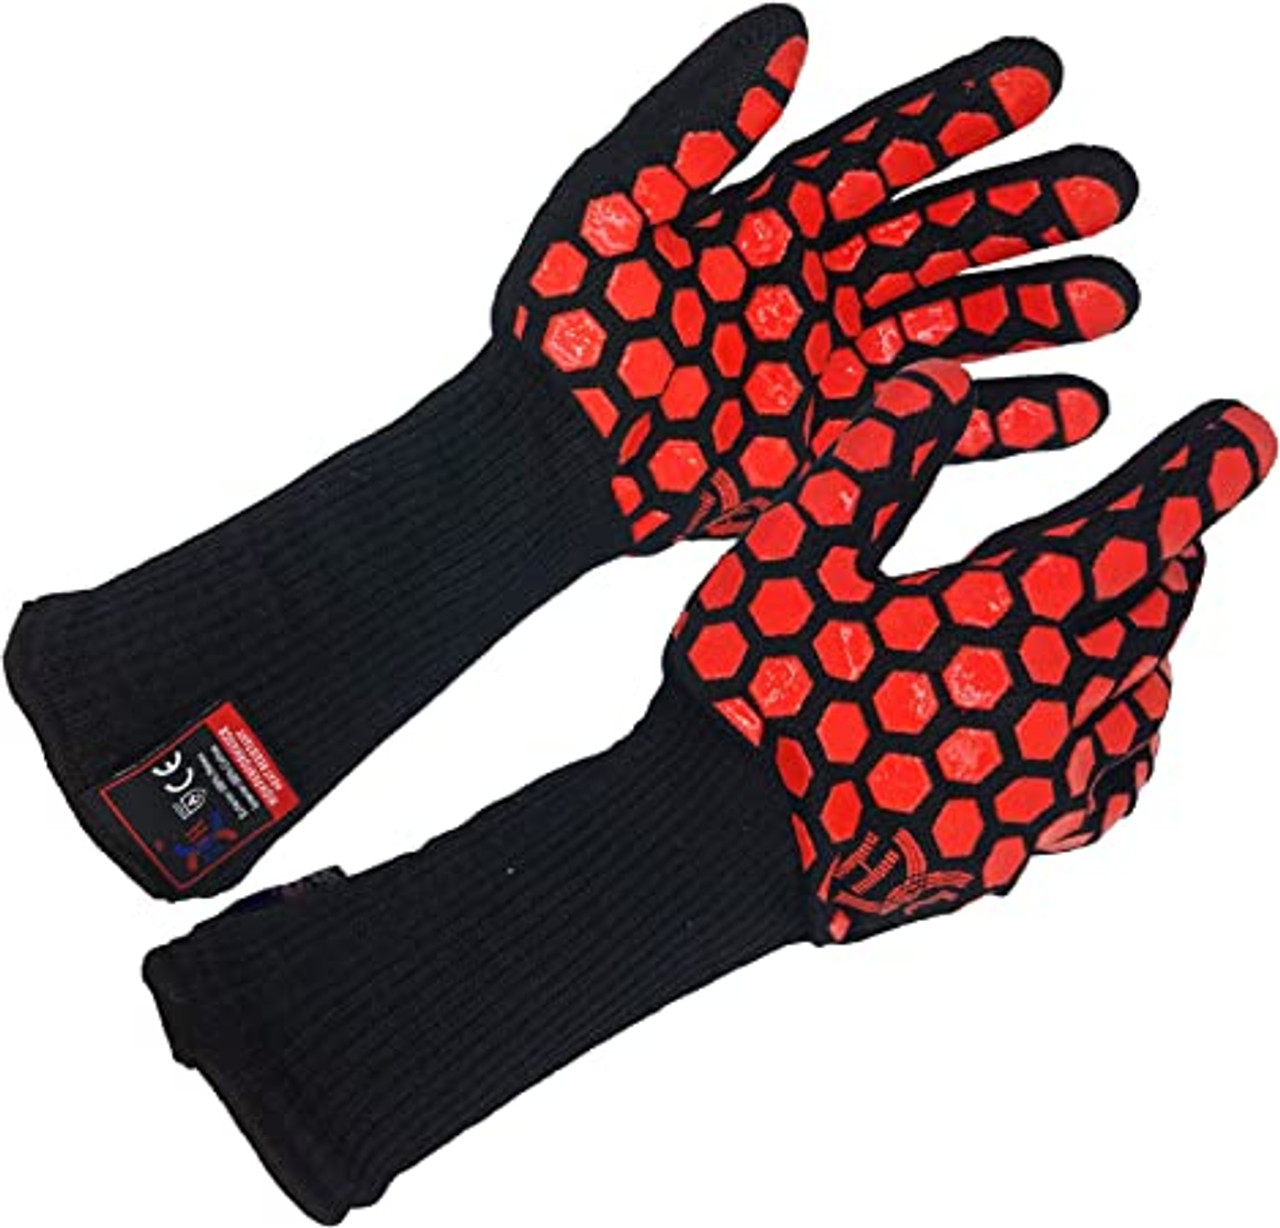 Get JH Heat Resistant Oven Gloves, 14 Inch Long Length